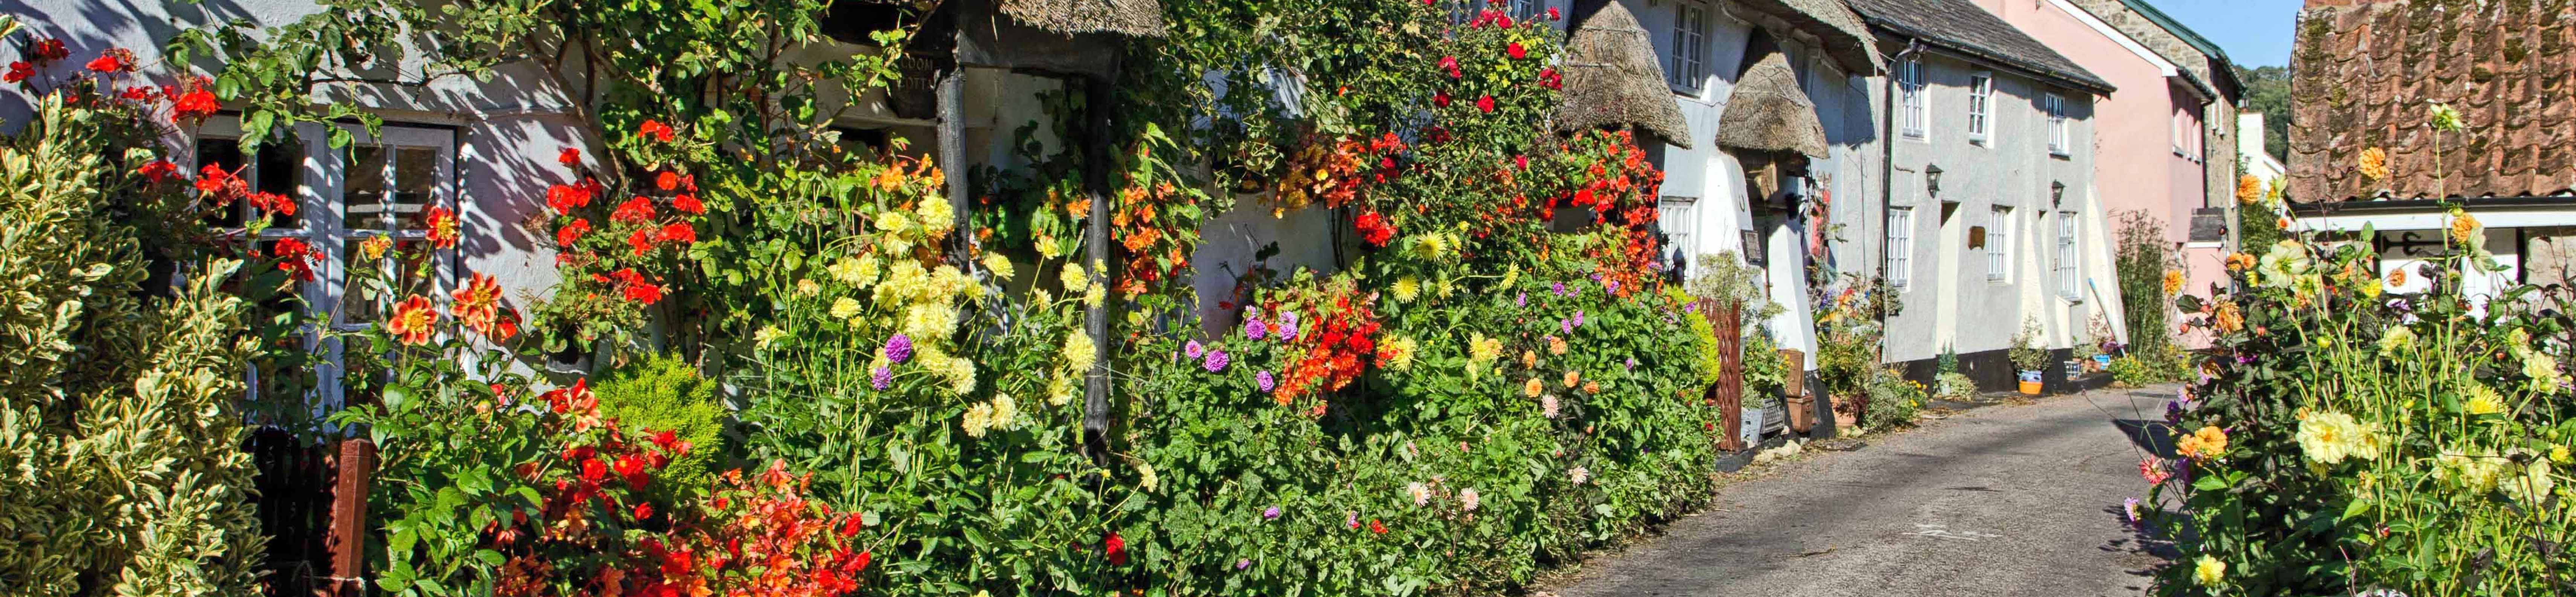 Colourful cottage and garden at Branscombe in Devon